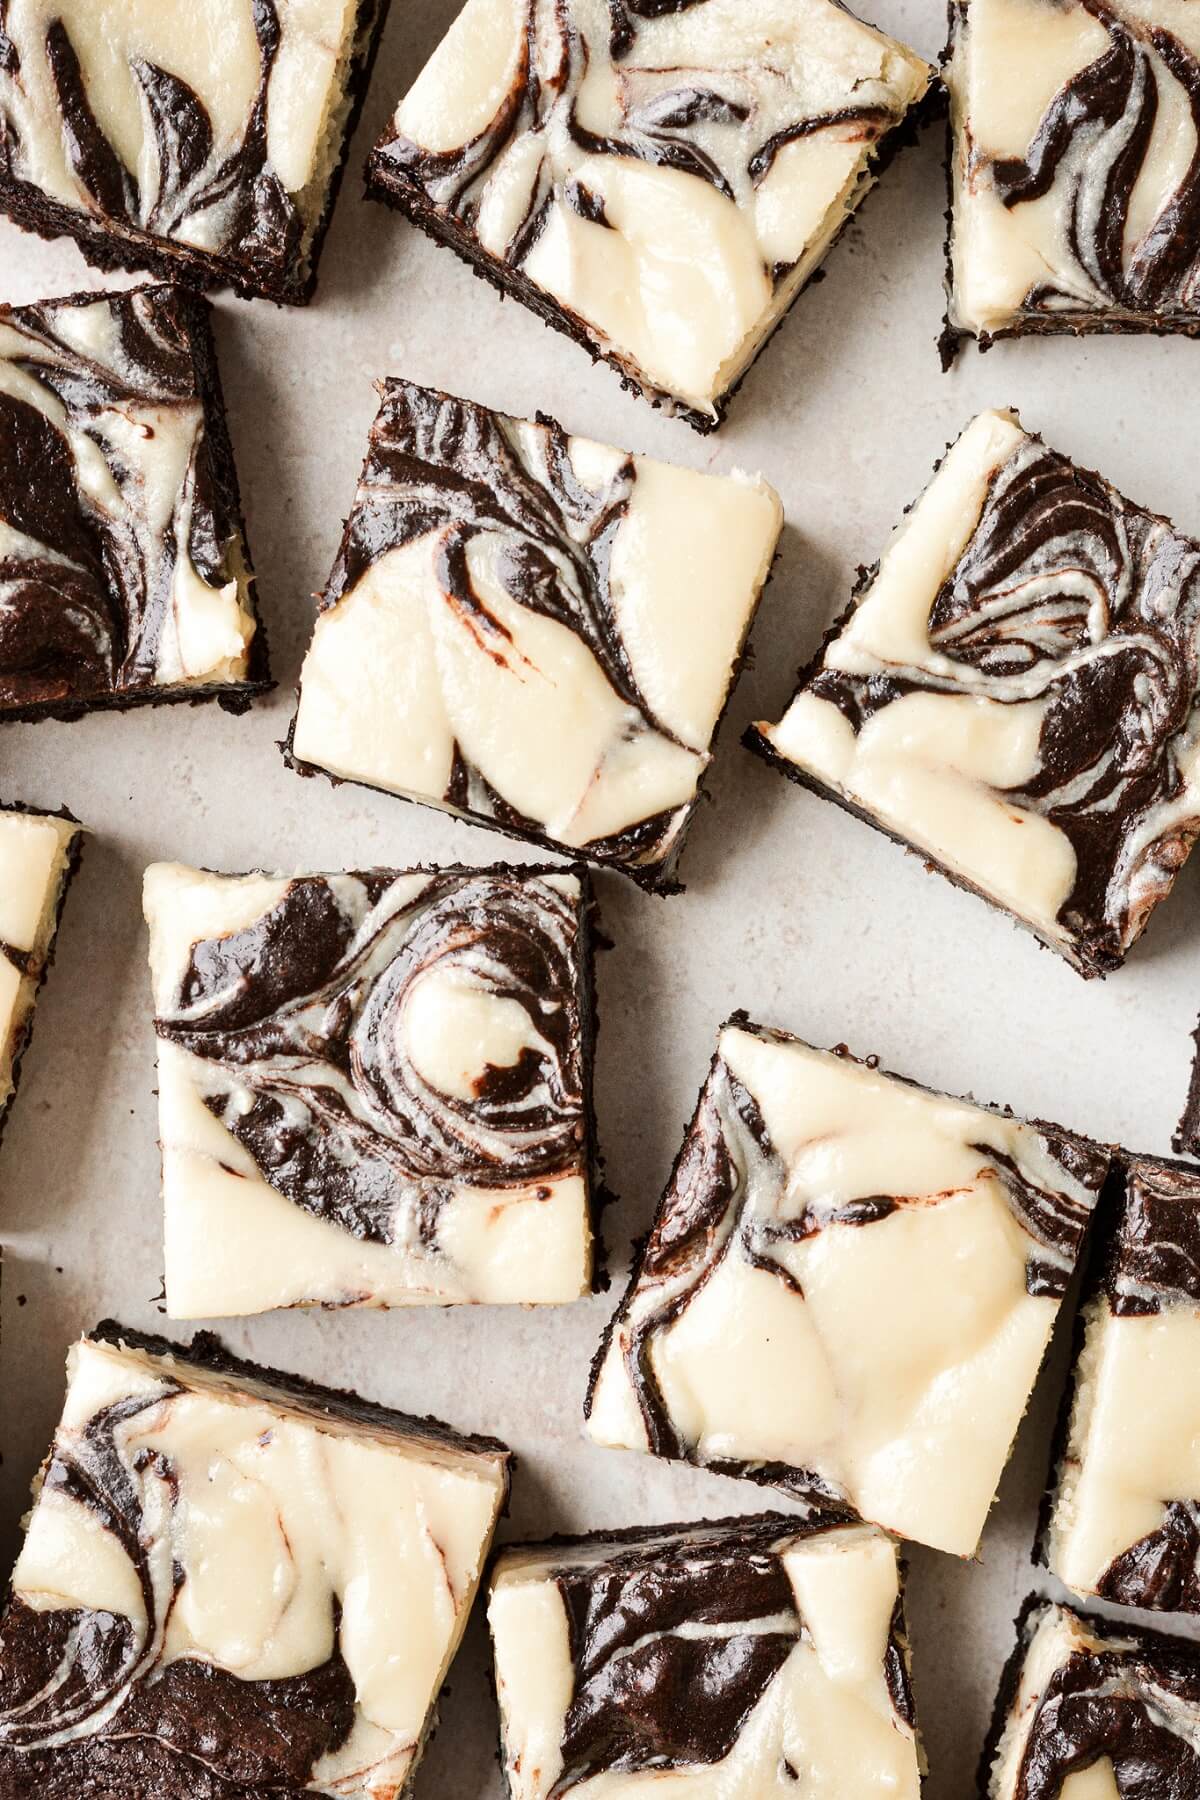 Cream cheese swirl brownies cut into squares.